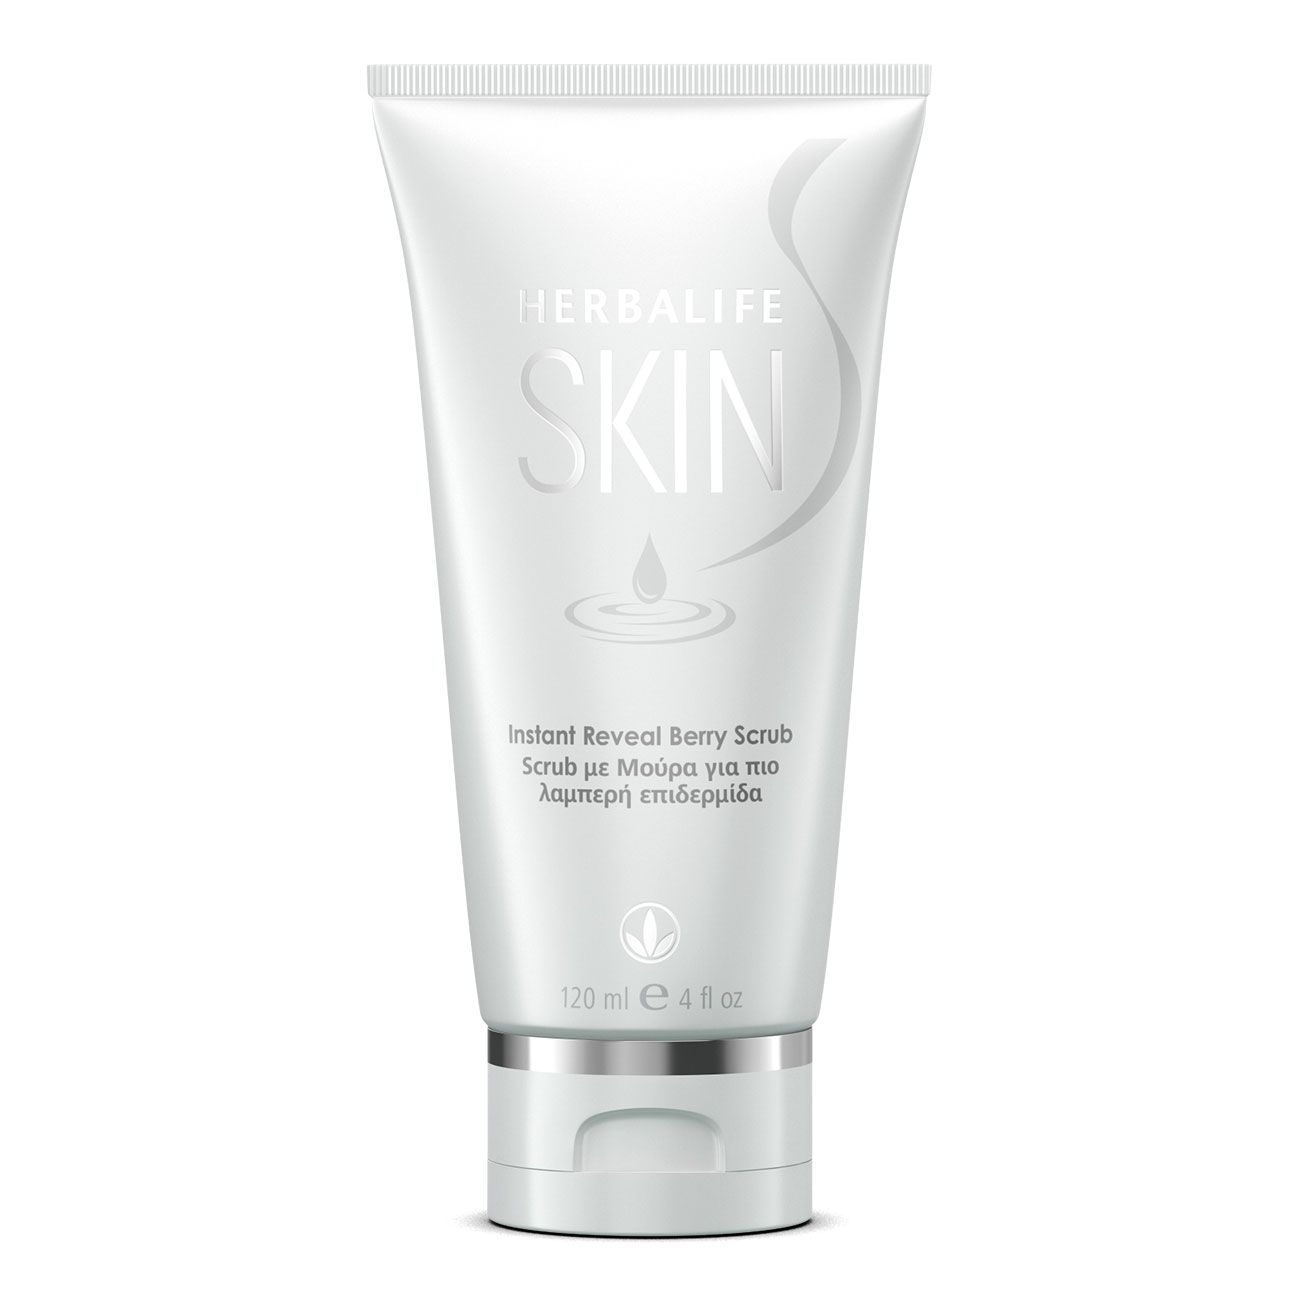 Herbalife SKIN Instant Reveal Berry Scrub  product